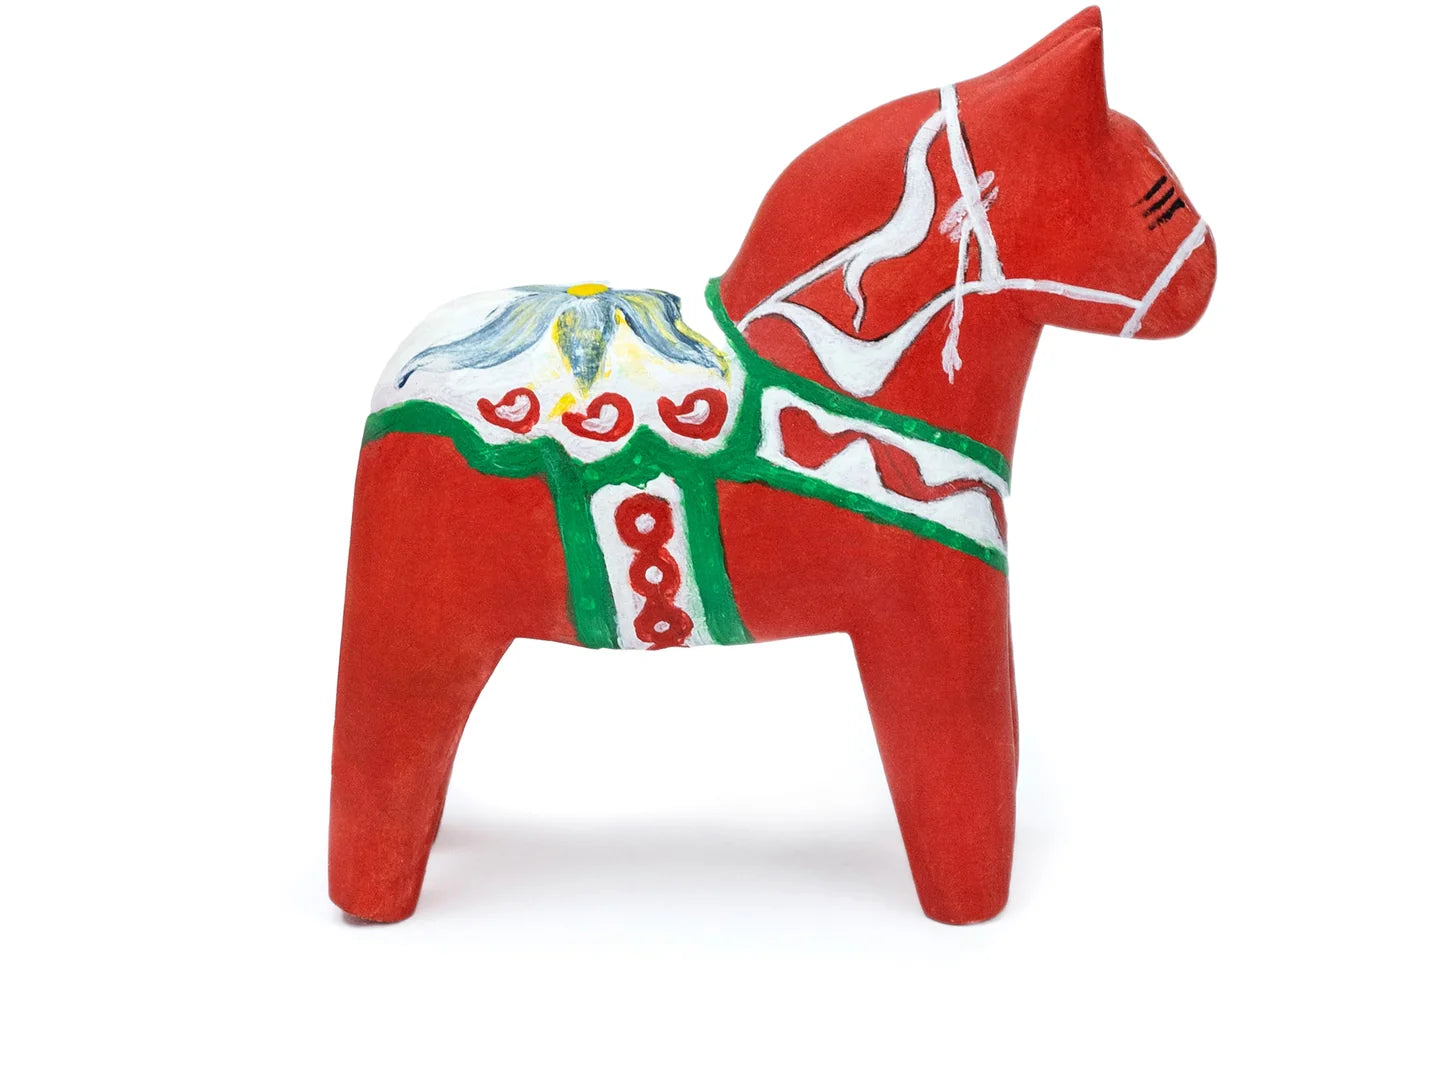 How to carve wooden horse